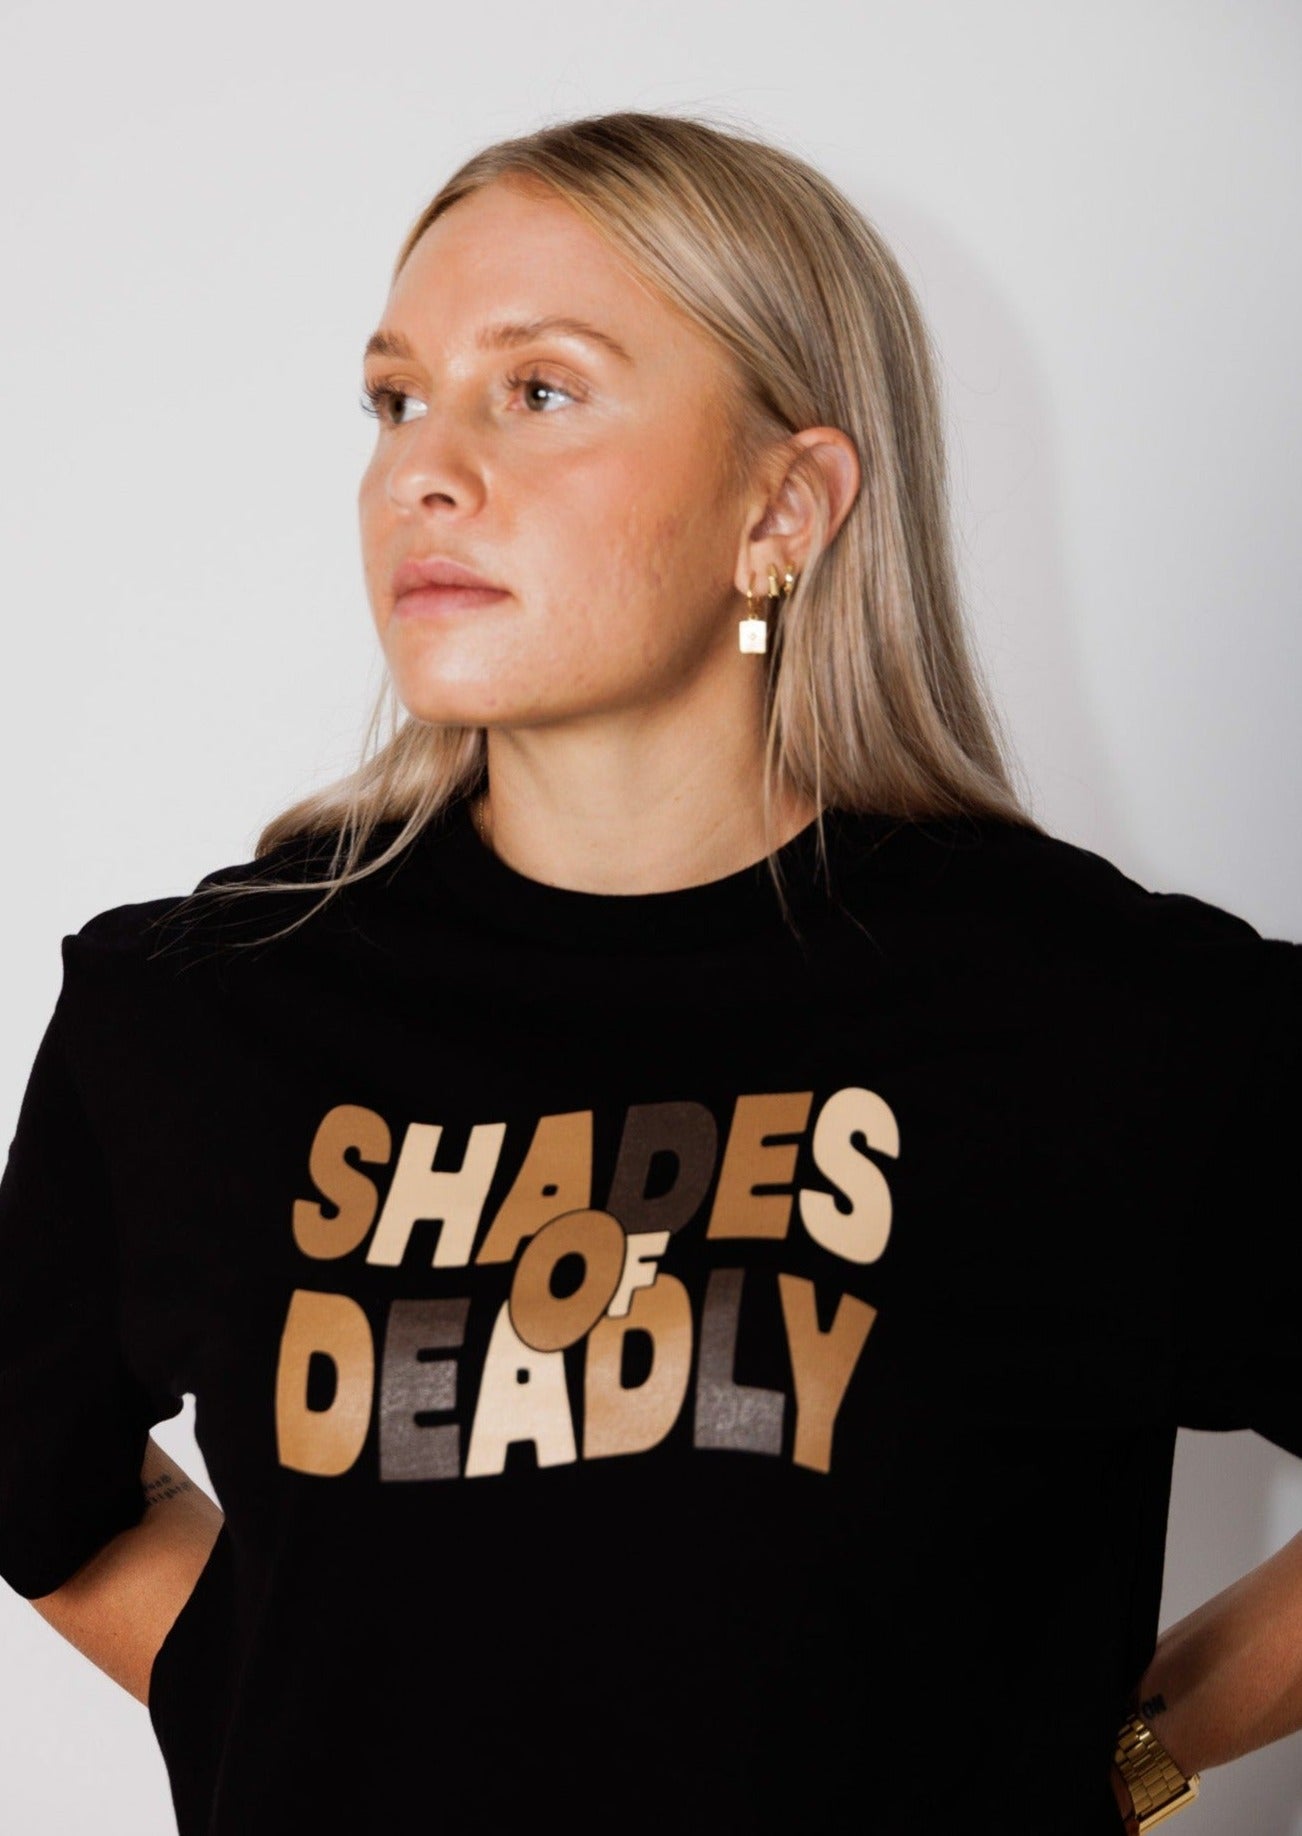 Clothing The Gaps. Shades of Deadly. Mob only T-shirt. Black T-shirt with 'Shades of Deadly' Screen printed on the front chest area with letters in different shades of brown and tan colours. 